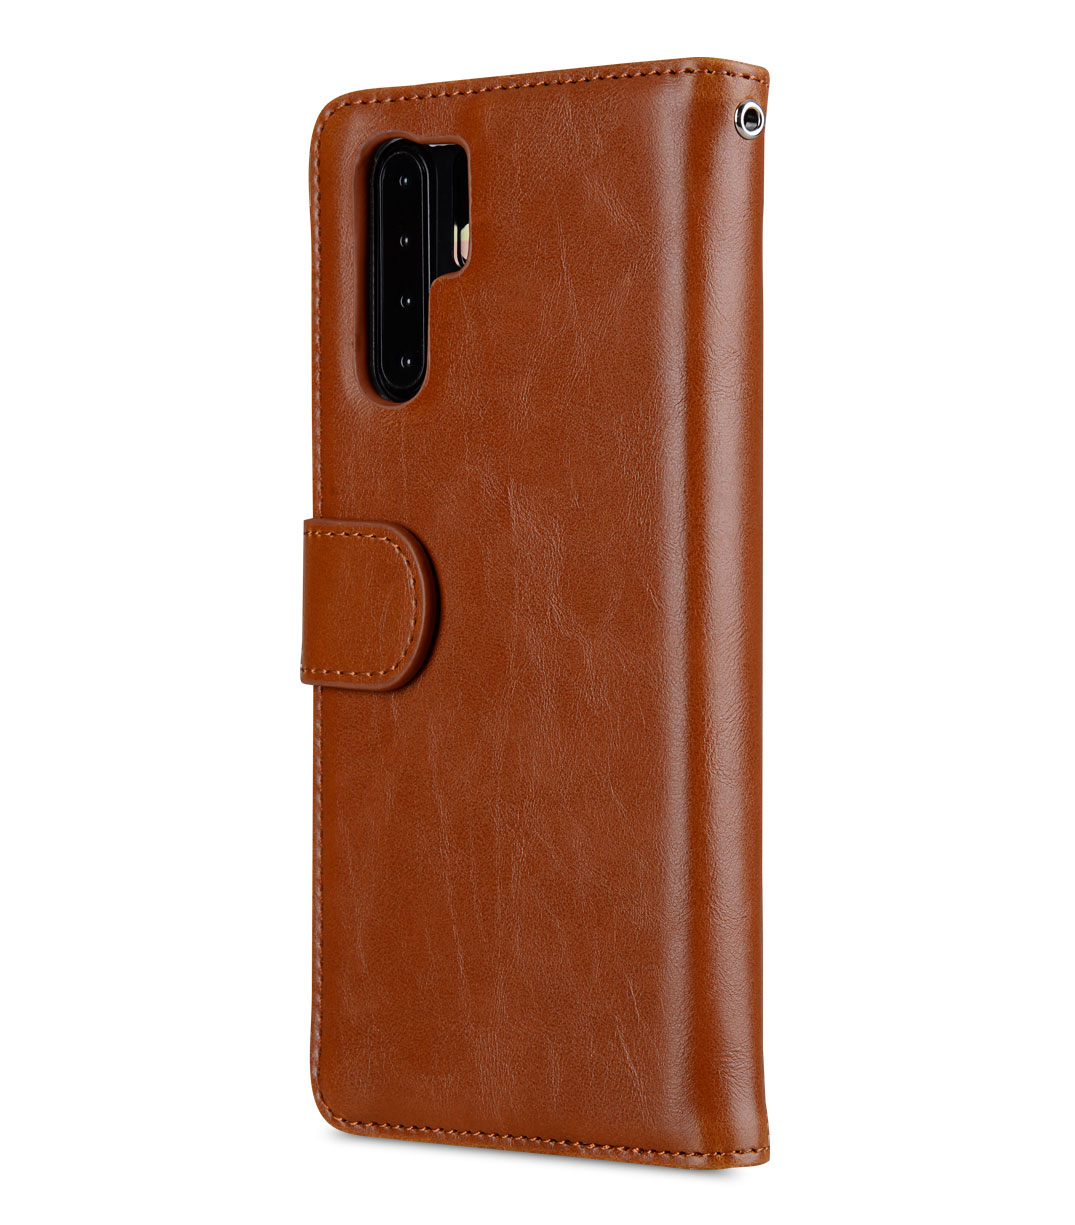 Melkco Wallet Book Series PU Leather Wallet Book Clear Type Case for Huawei P30 Pro - ( Brown )